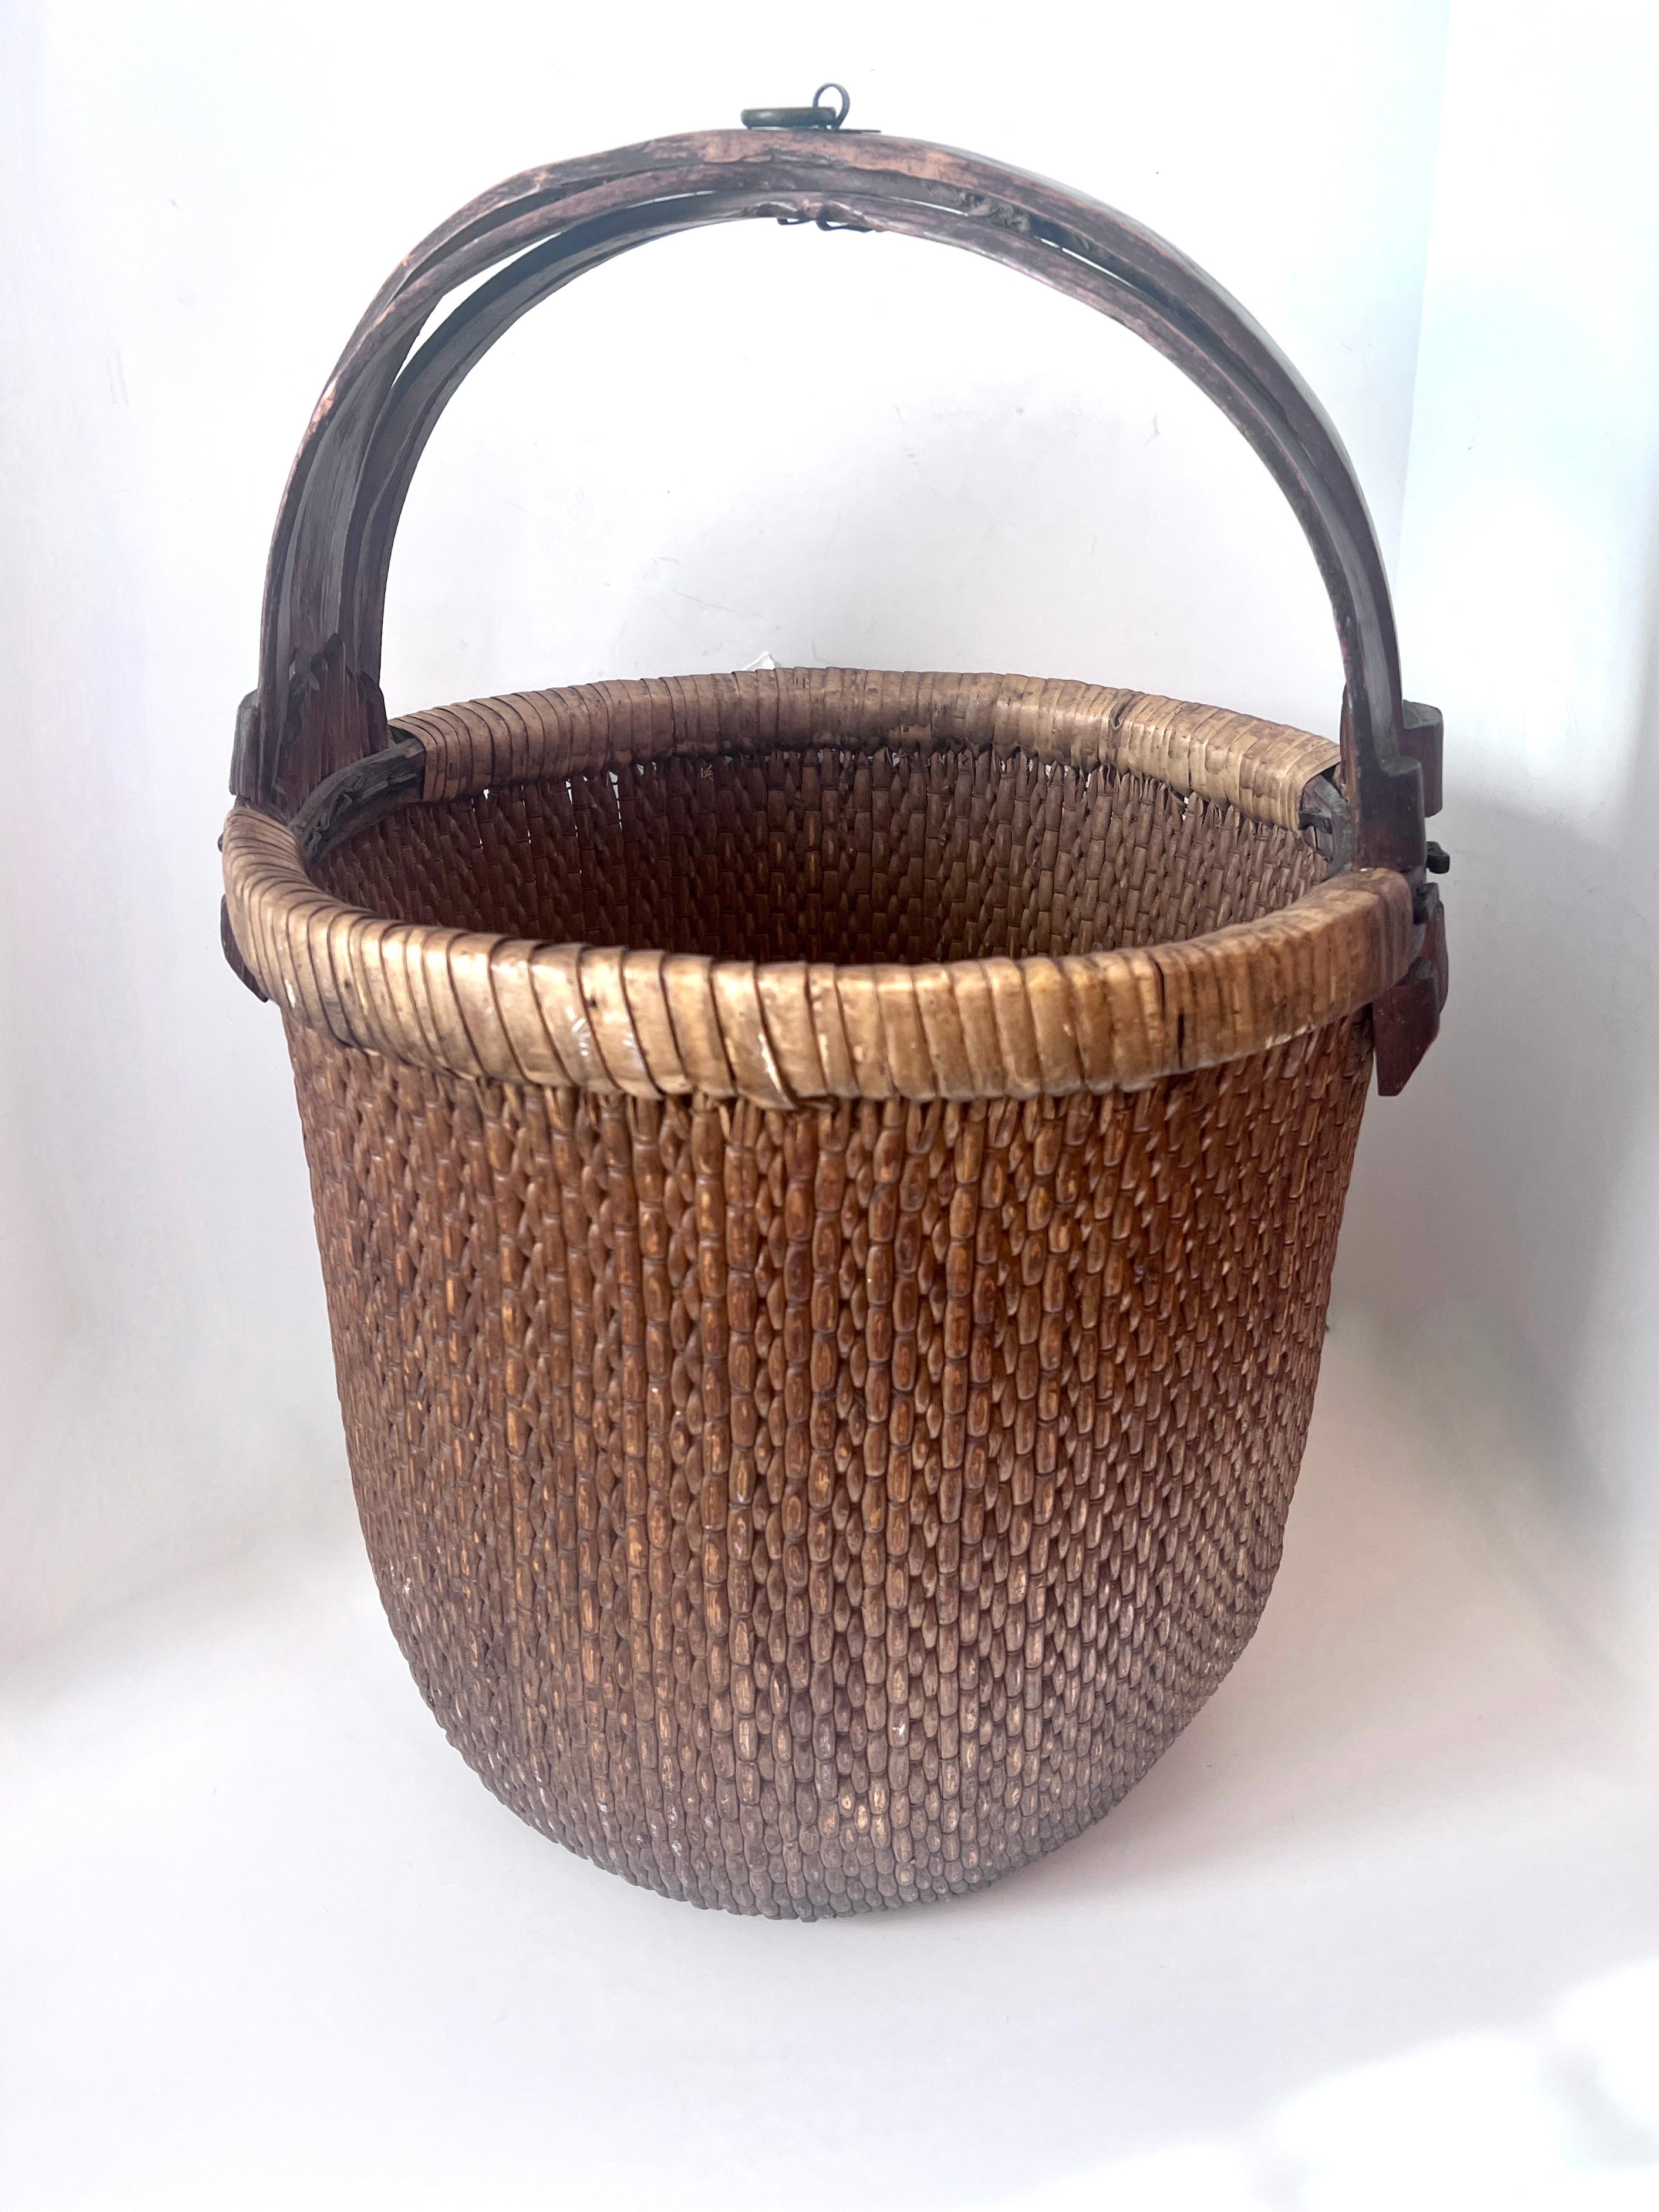 A hand woven and hand crafted Rice Basket.   Woven with Rattan and framed in wood with bamboo.   A very solid and well thought out and well made piece, late 19th / Early 20th Century Basket.

While it could be used for practical purposes, we like to